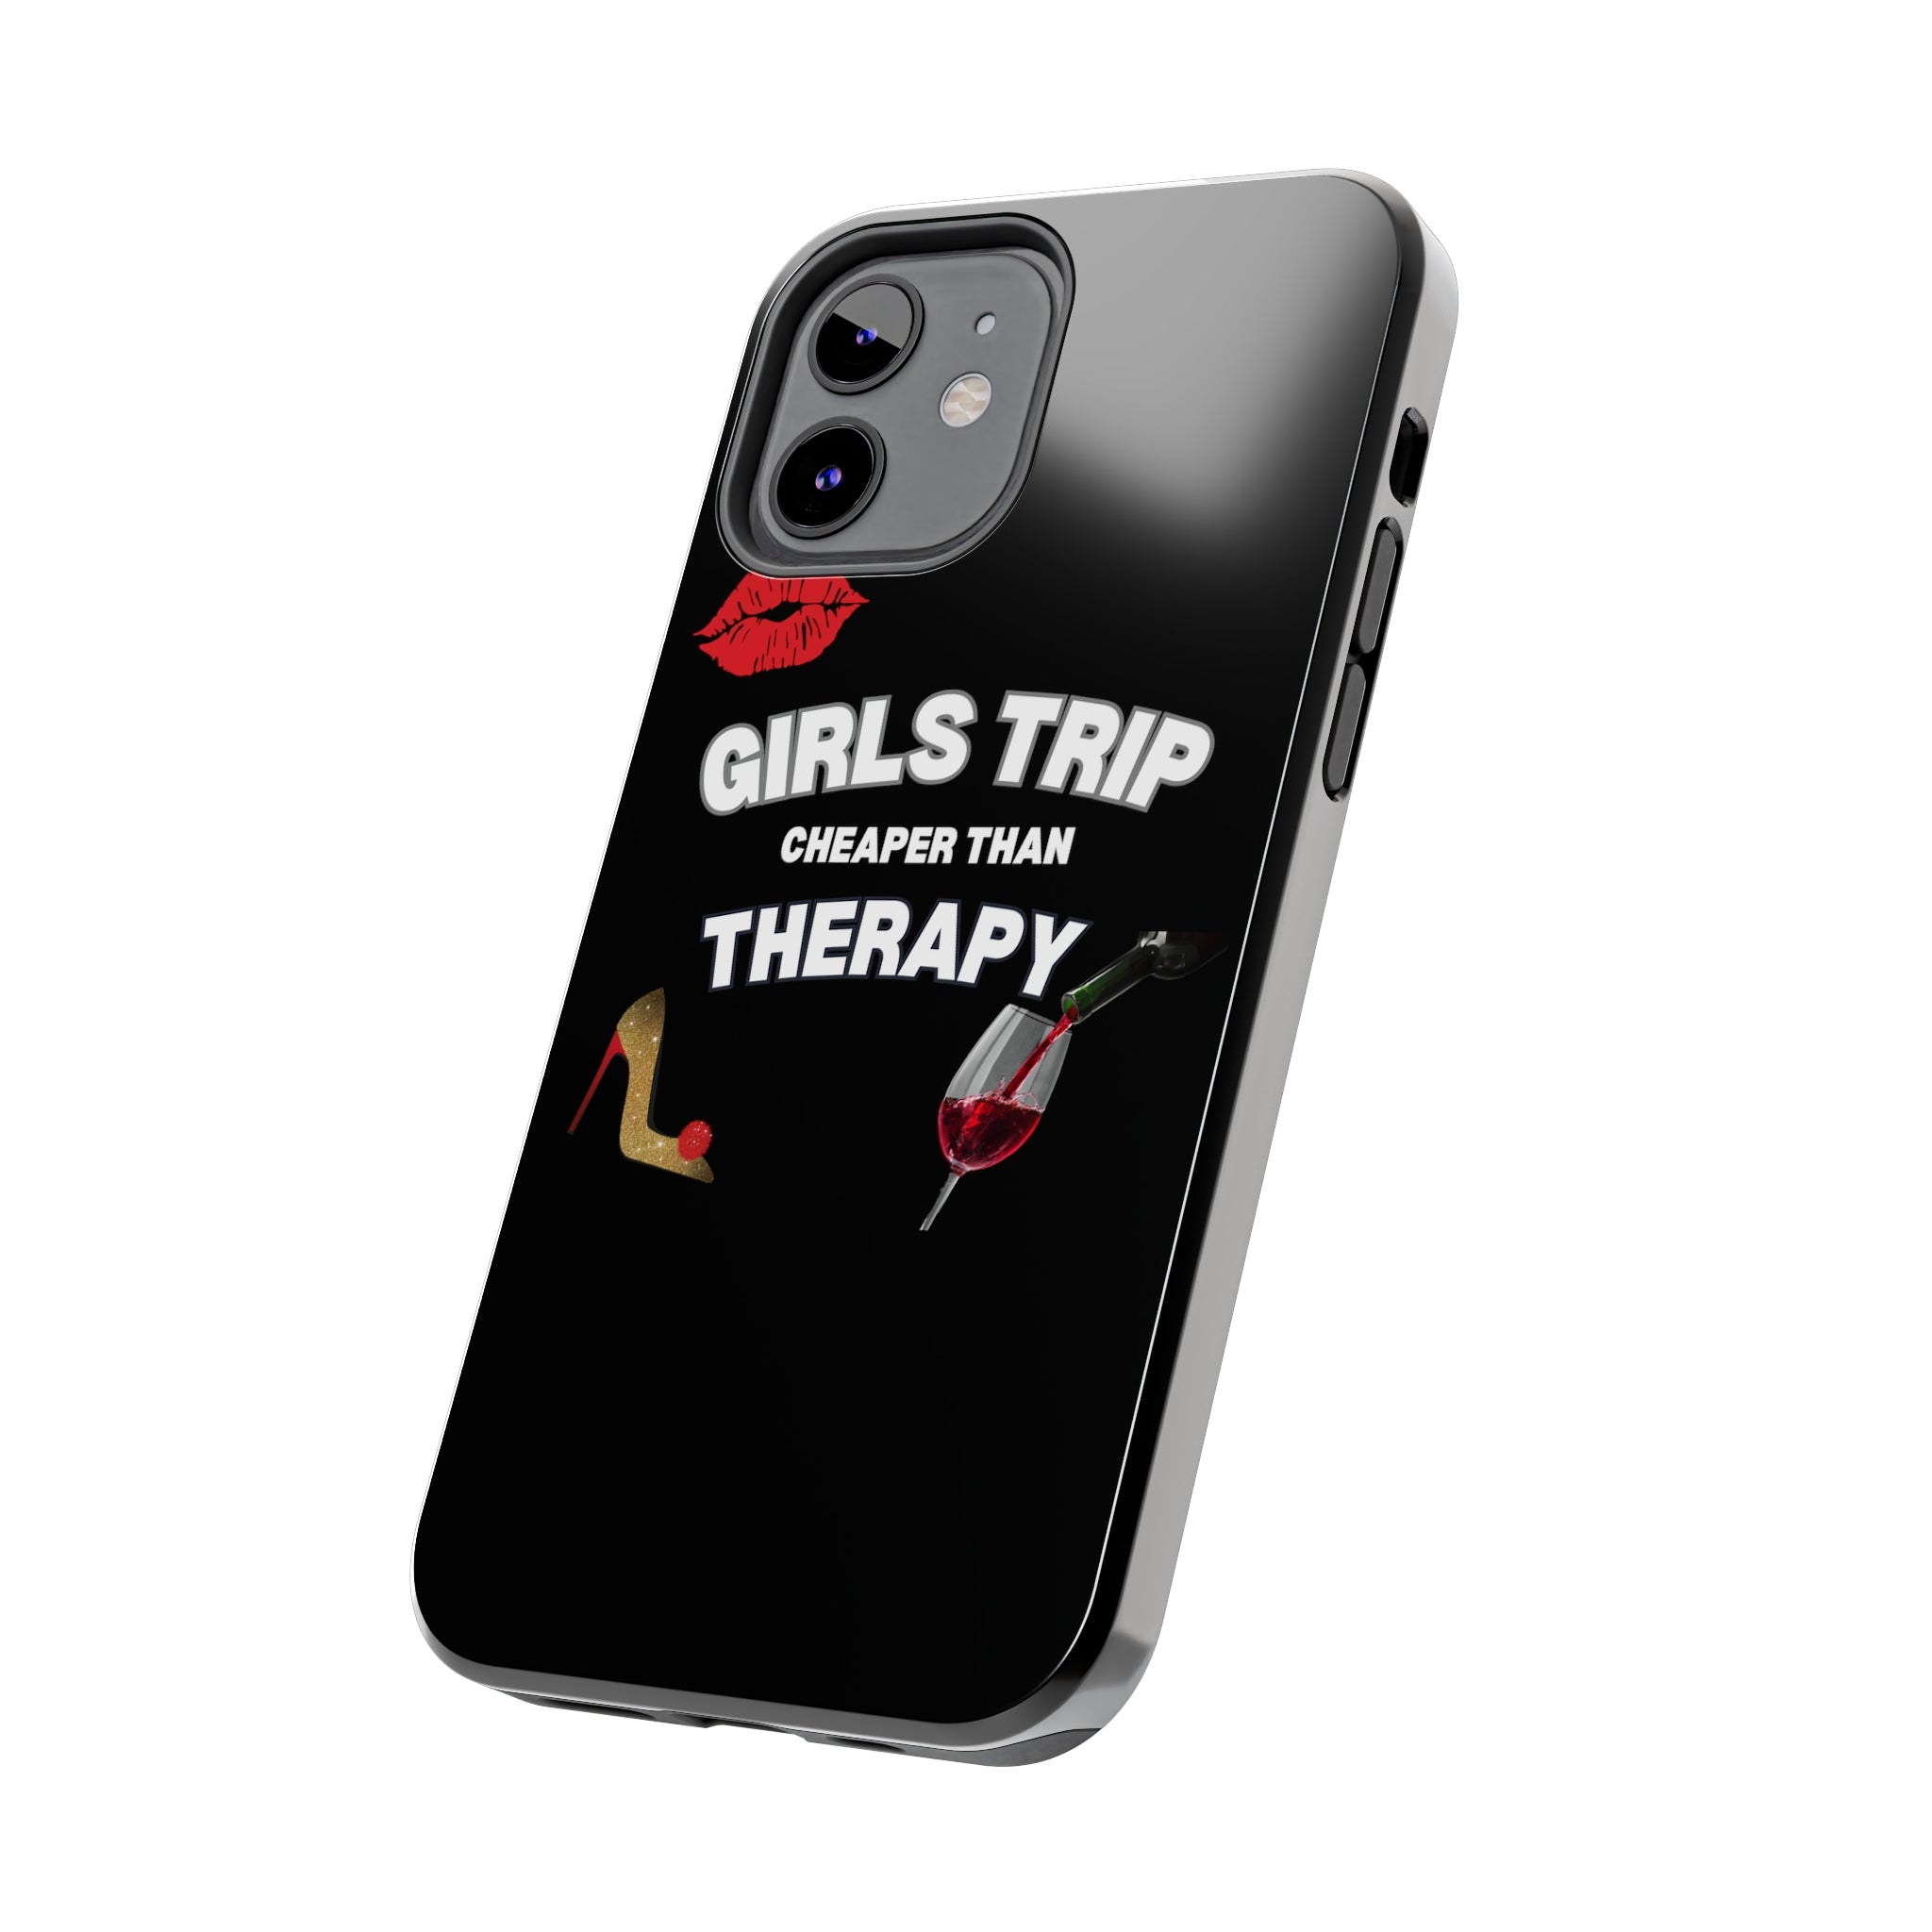 GIRLS TRIP CHEAPER THAN THERAPY PHONECASE